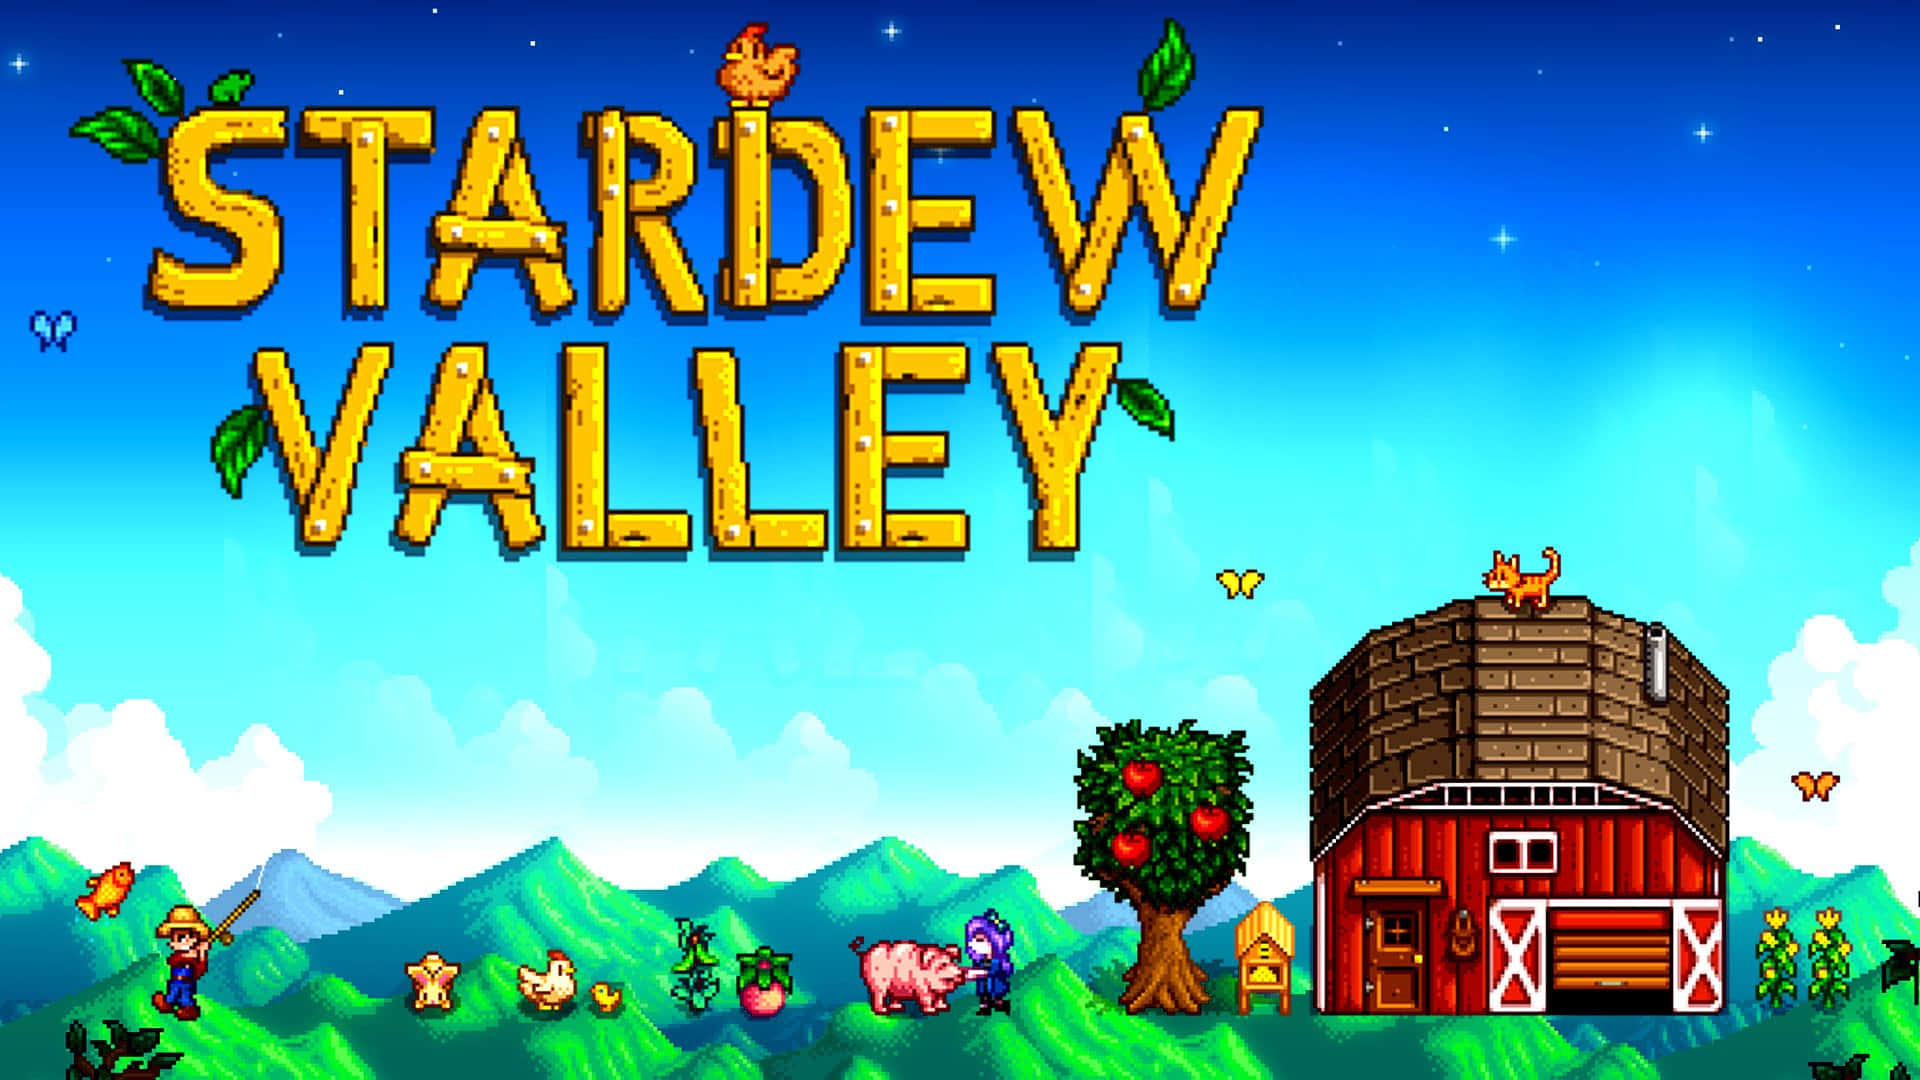 Unwind and connect with nature in Stardew Valley